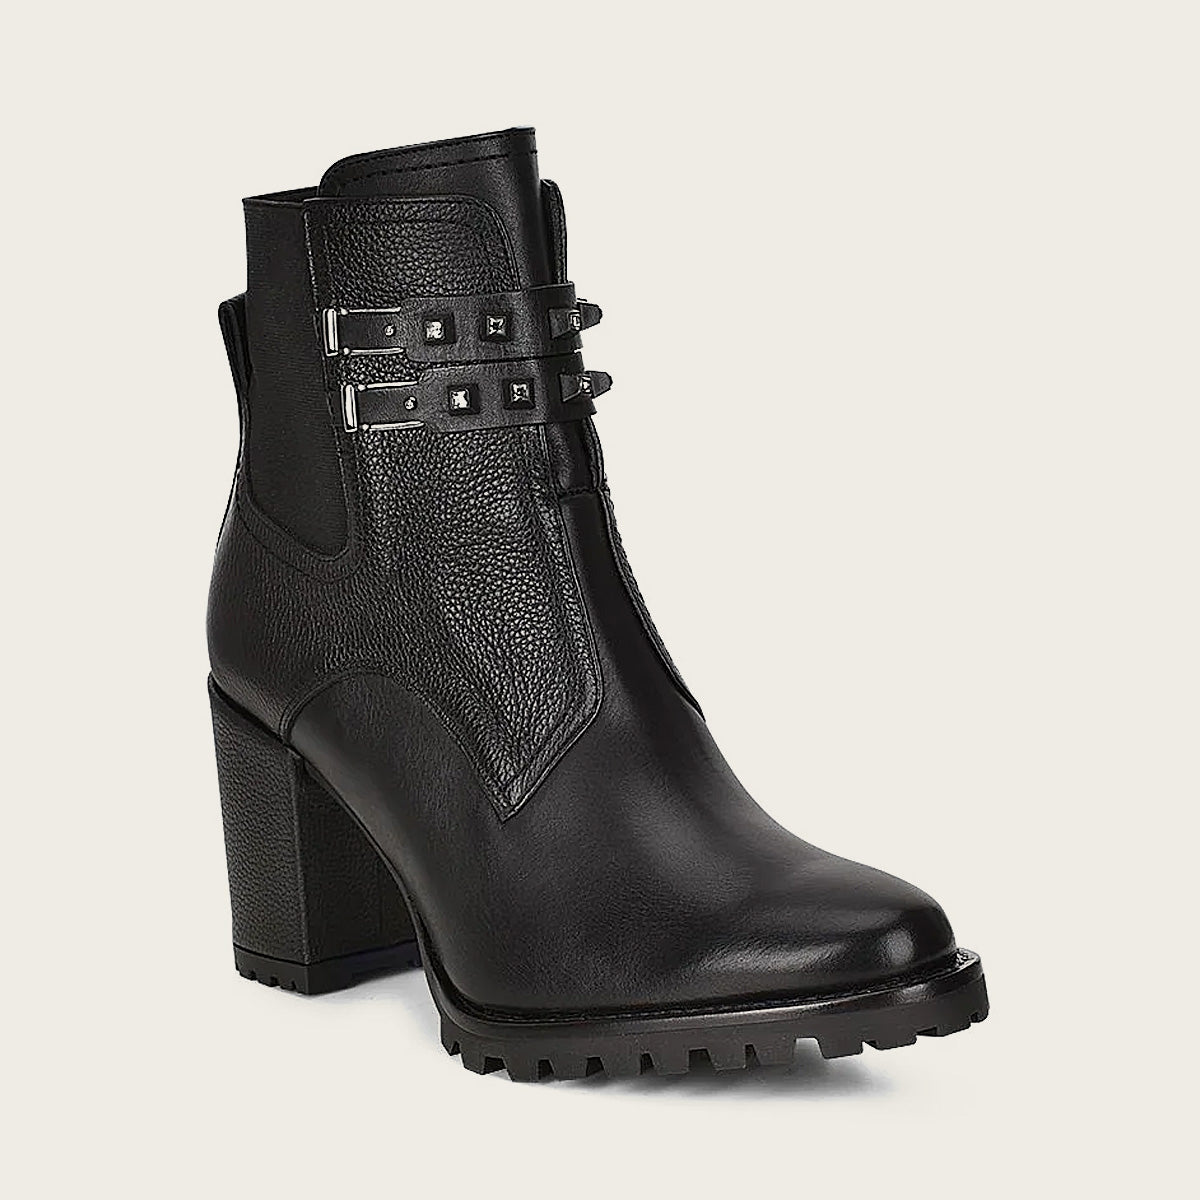 Crafted with bovine leather, the bootie features studded straps with genuine crystals